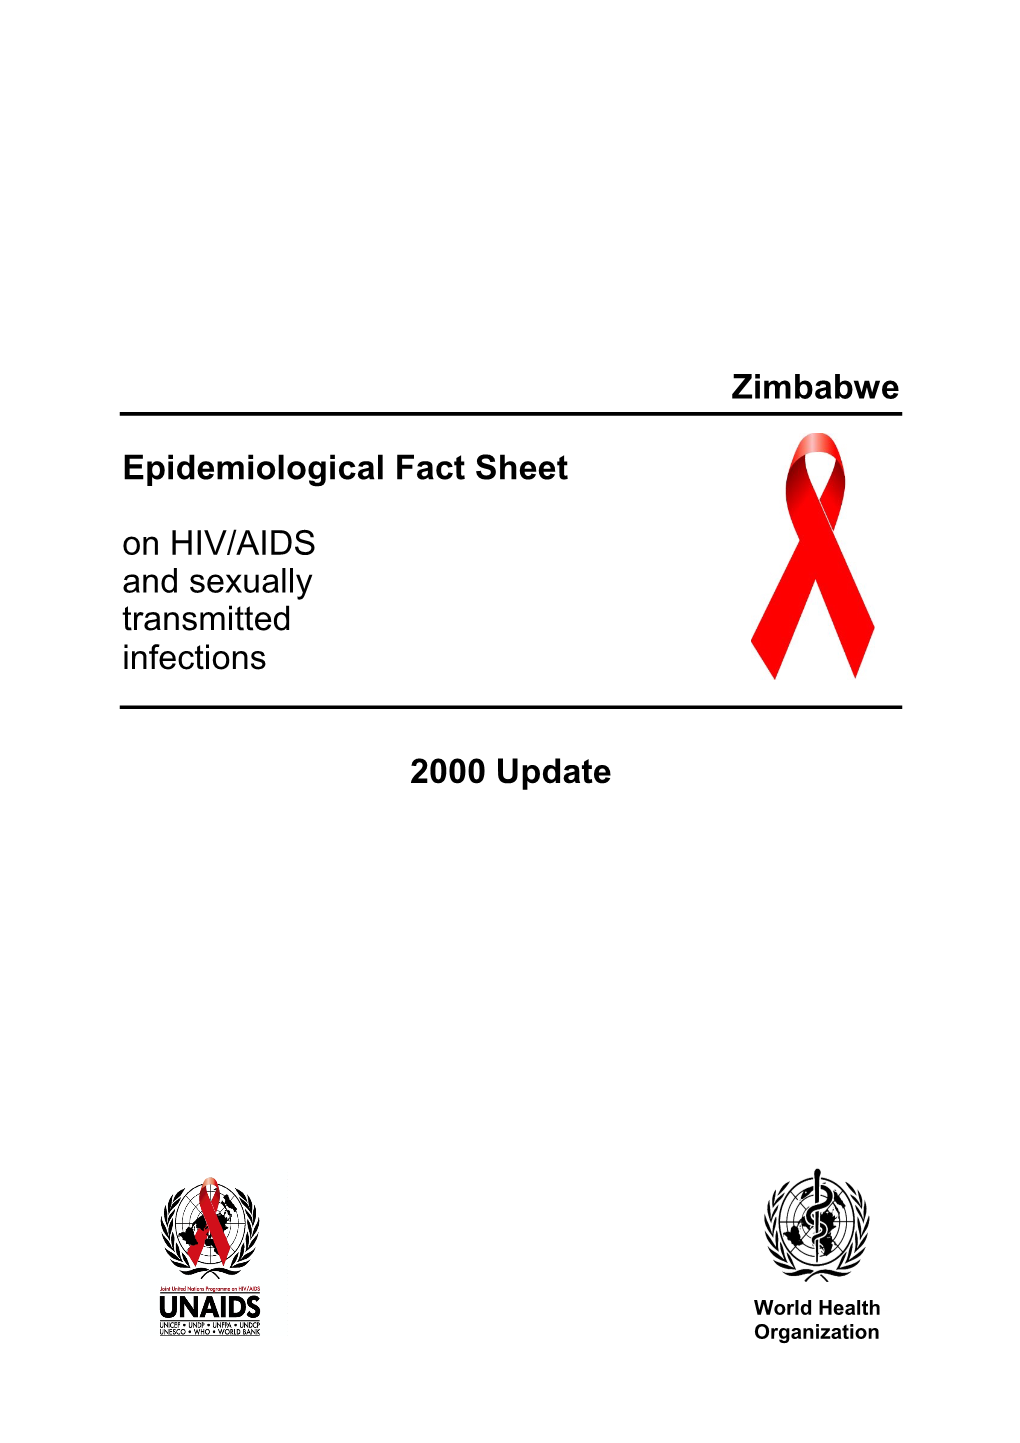 Zimbabwe Epidemiological Fact Sheet on HIV/AIDS and Sexually